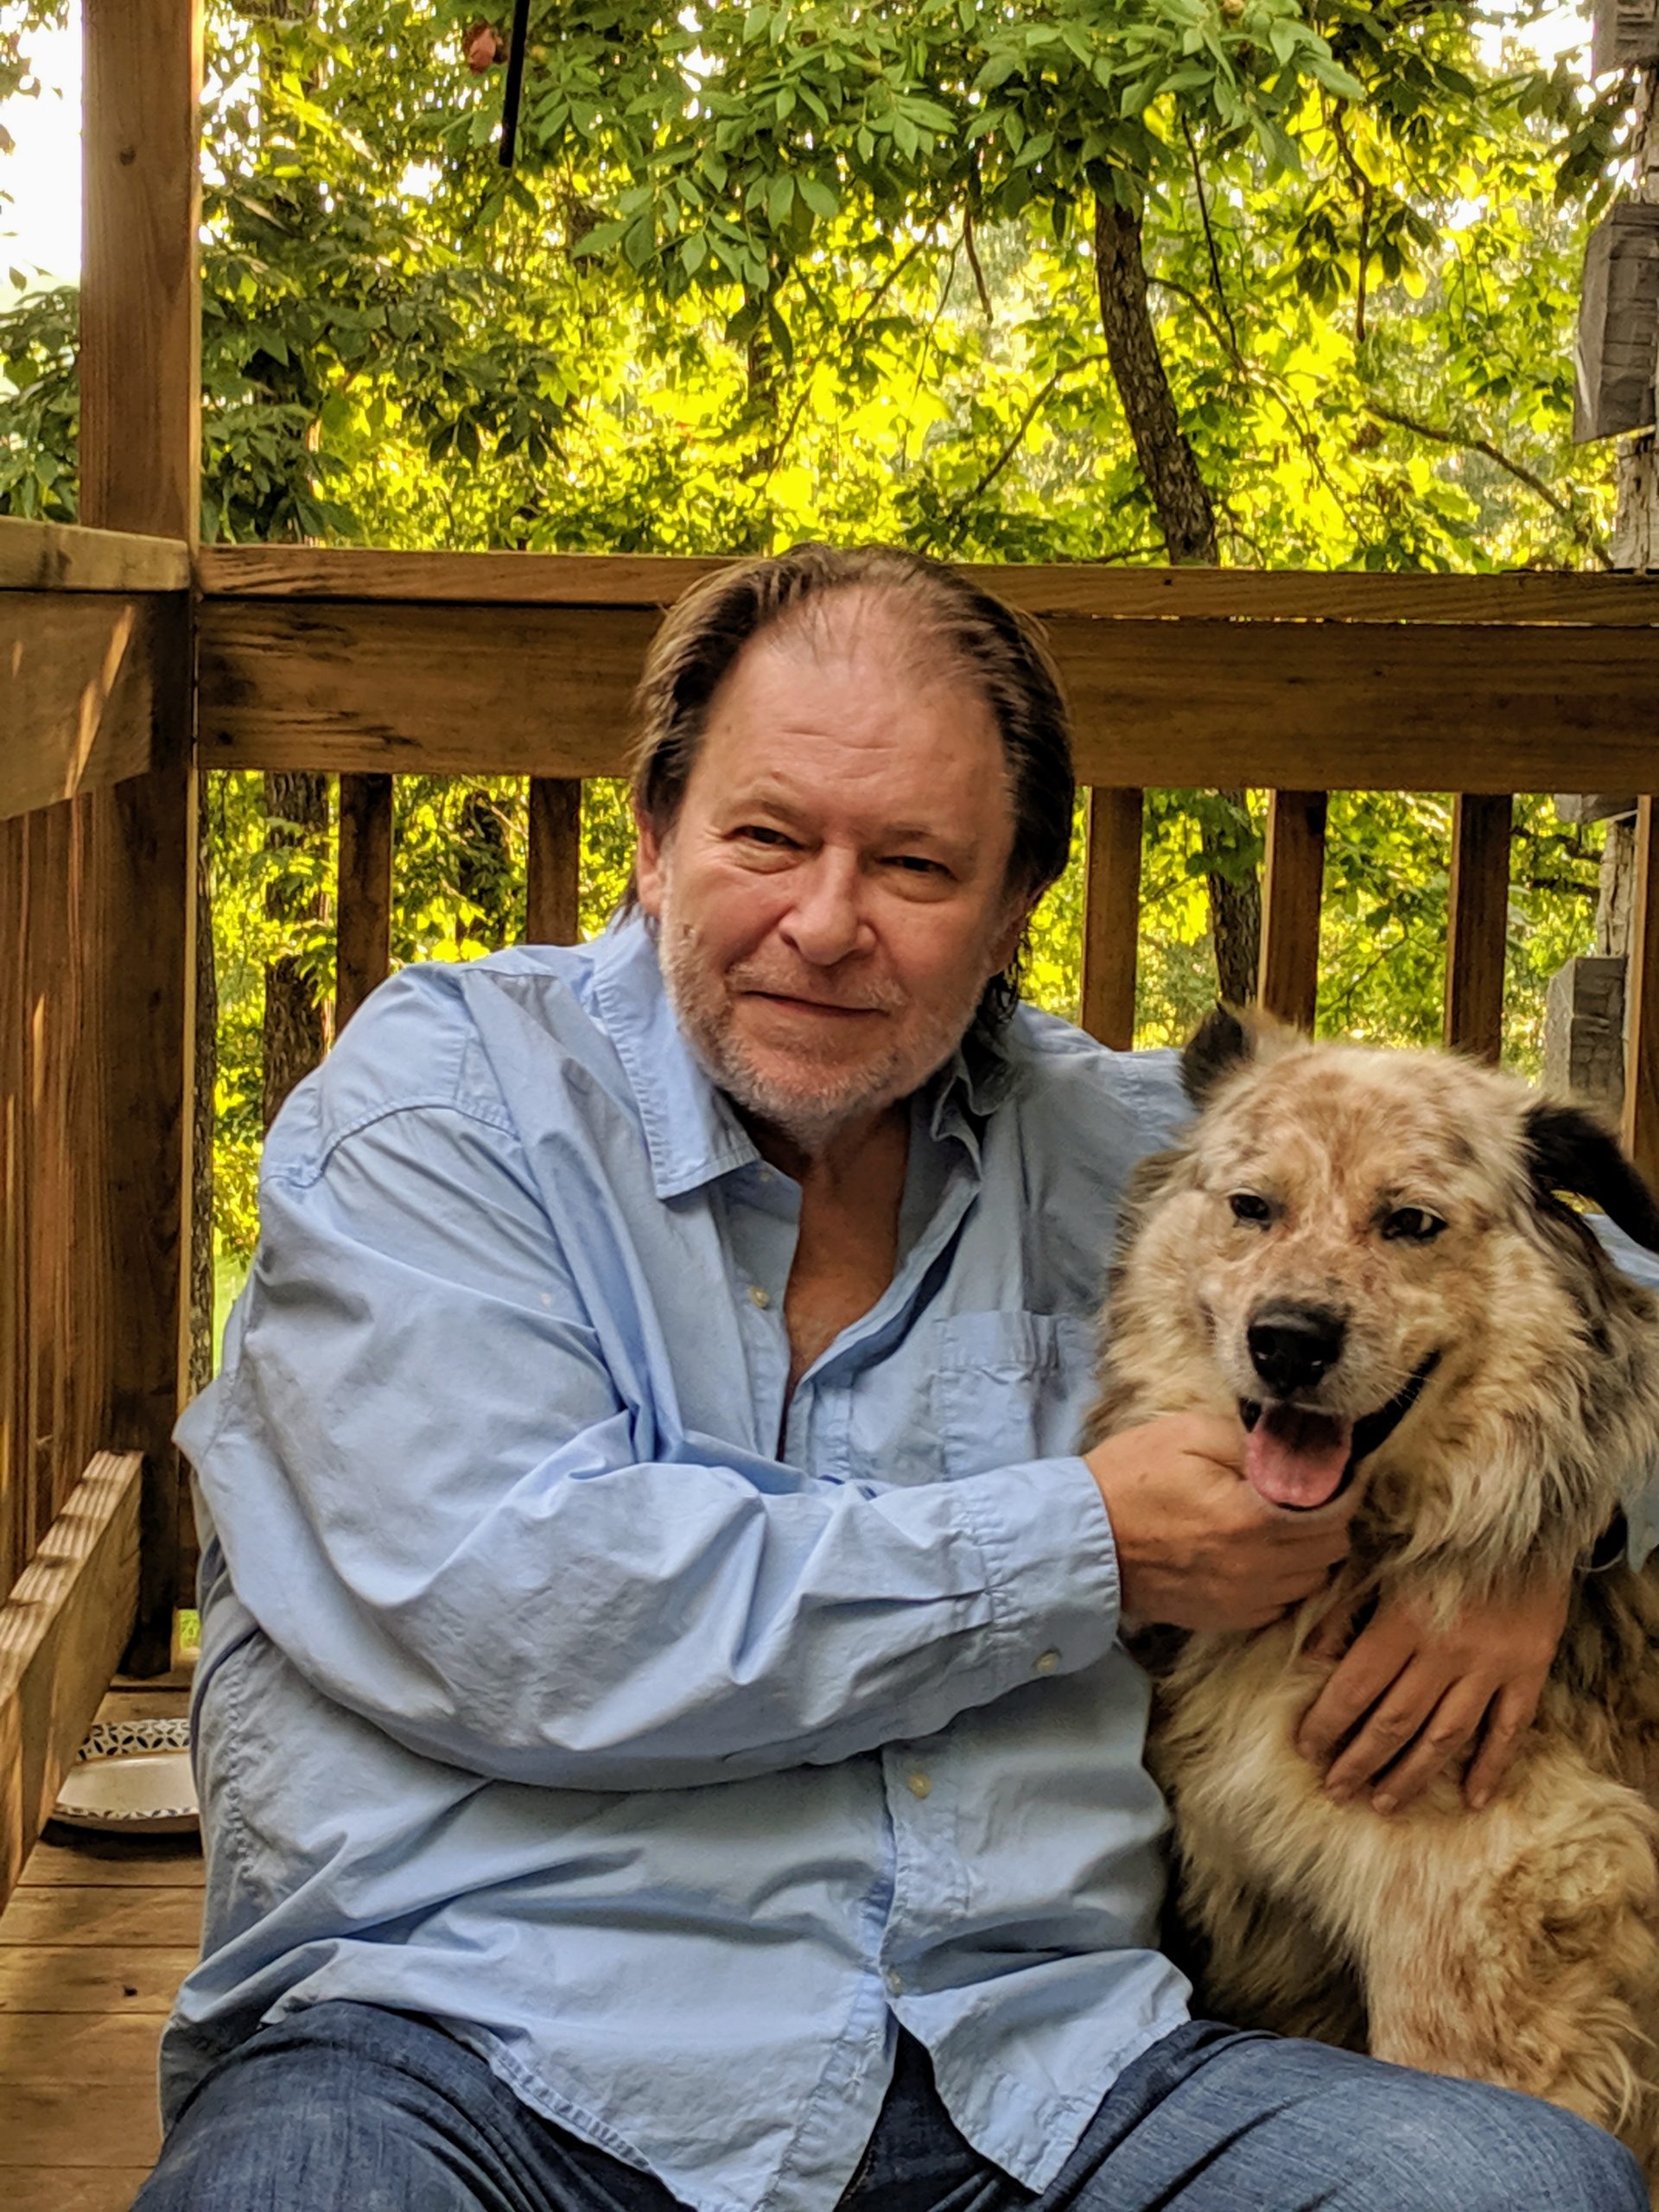 Our Q&A with Rick Bragg Went About as You'd Expect Garden & Gun